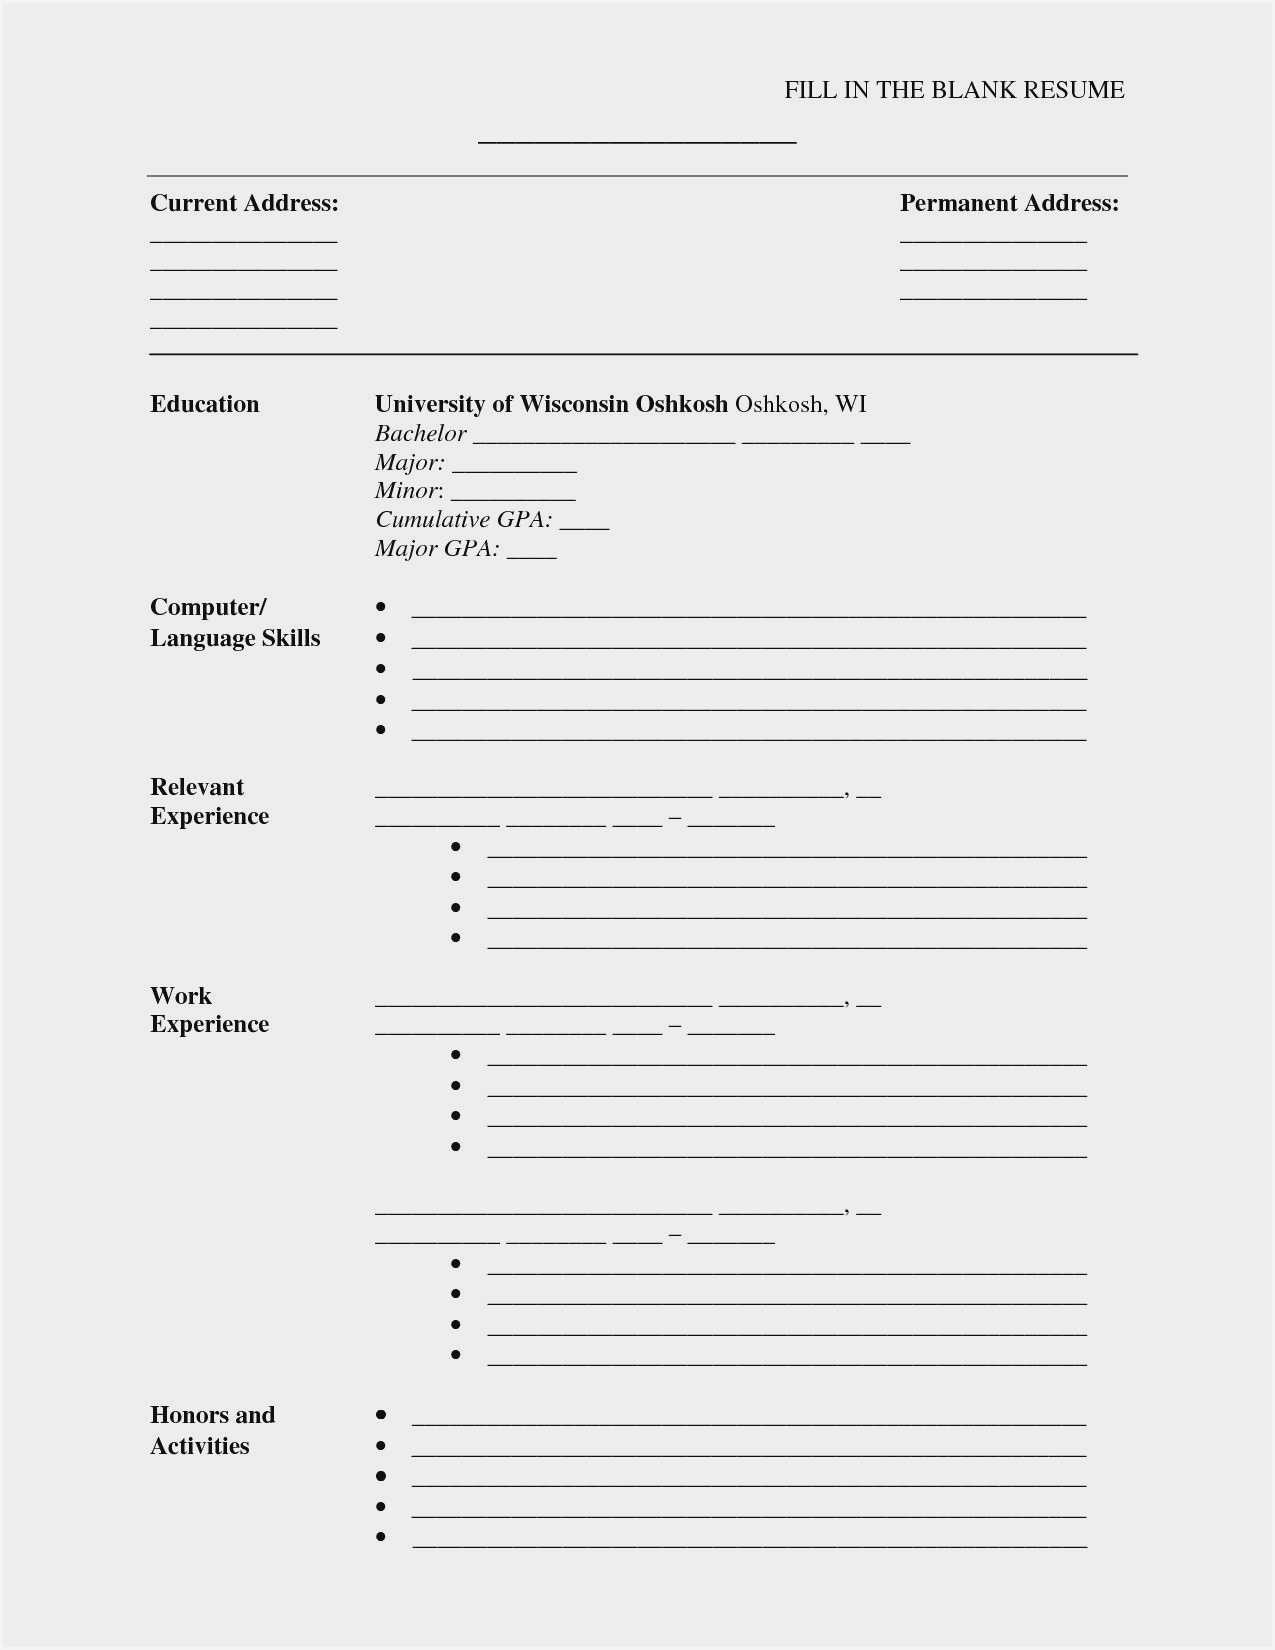 Blank Cv Format Word Download - Resume : Resume Sample #3945 Intended For Free Blank Resume Templates For Microsoft Word